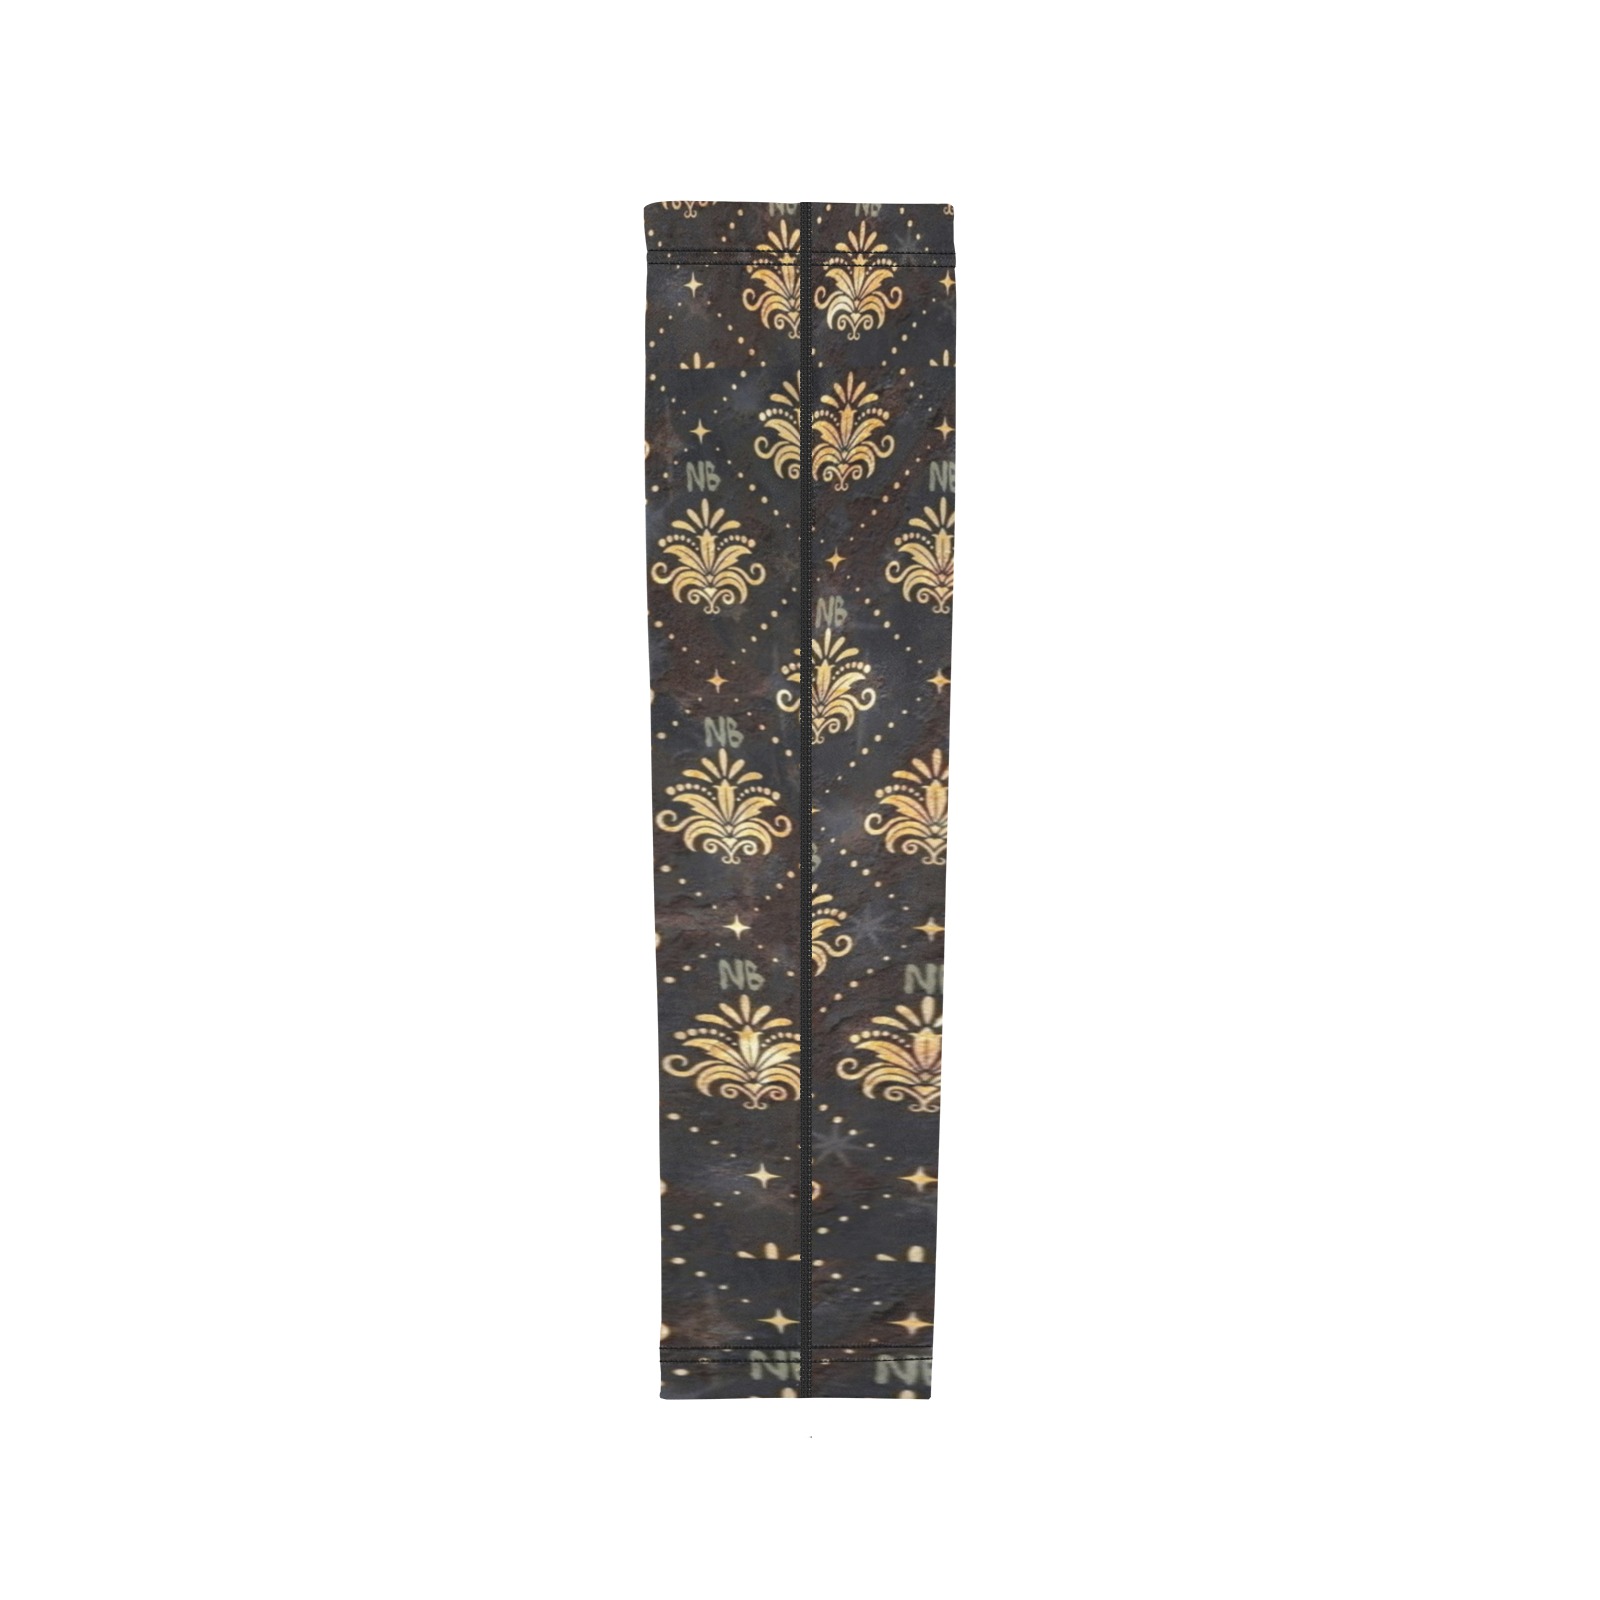 Royal Pattern by Nico Bielow Arm Sleeves (Set of Two)